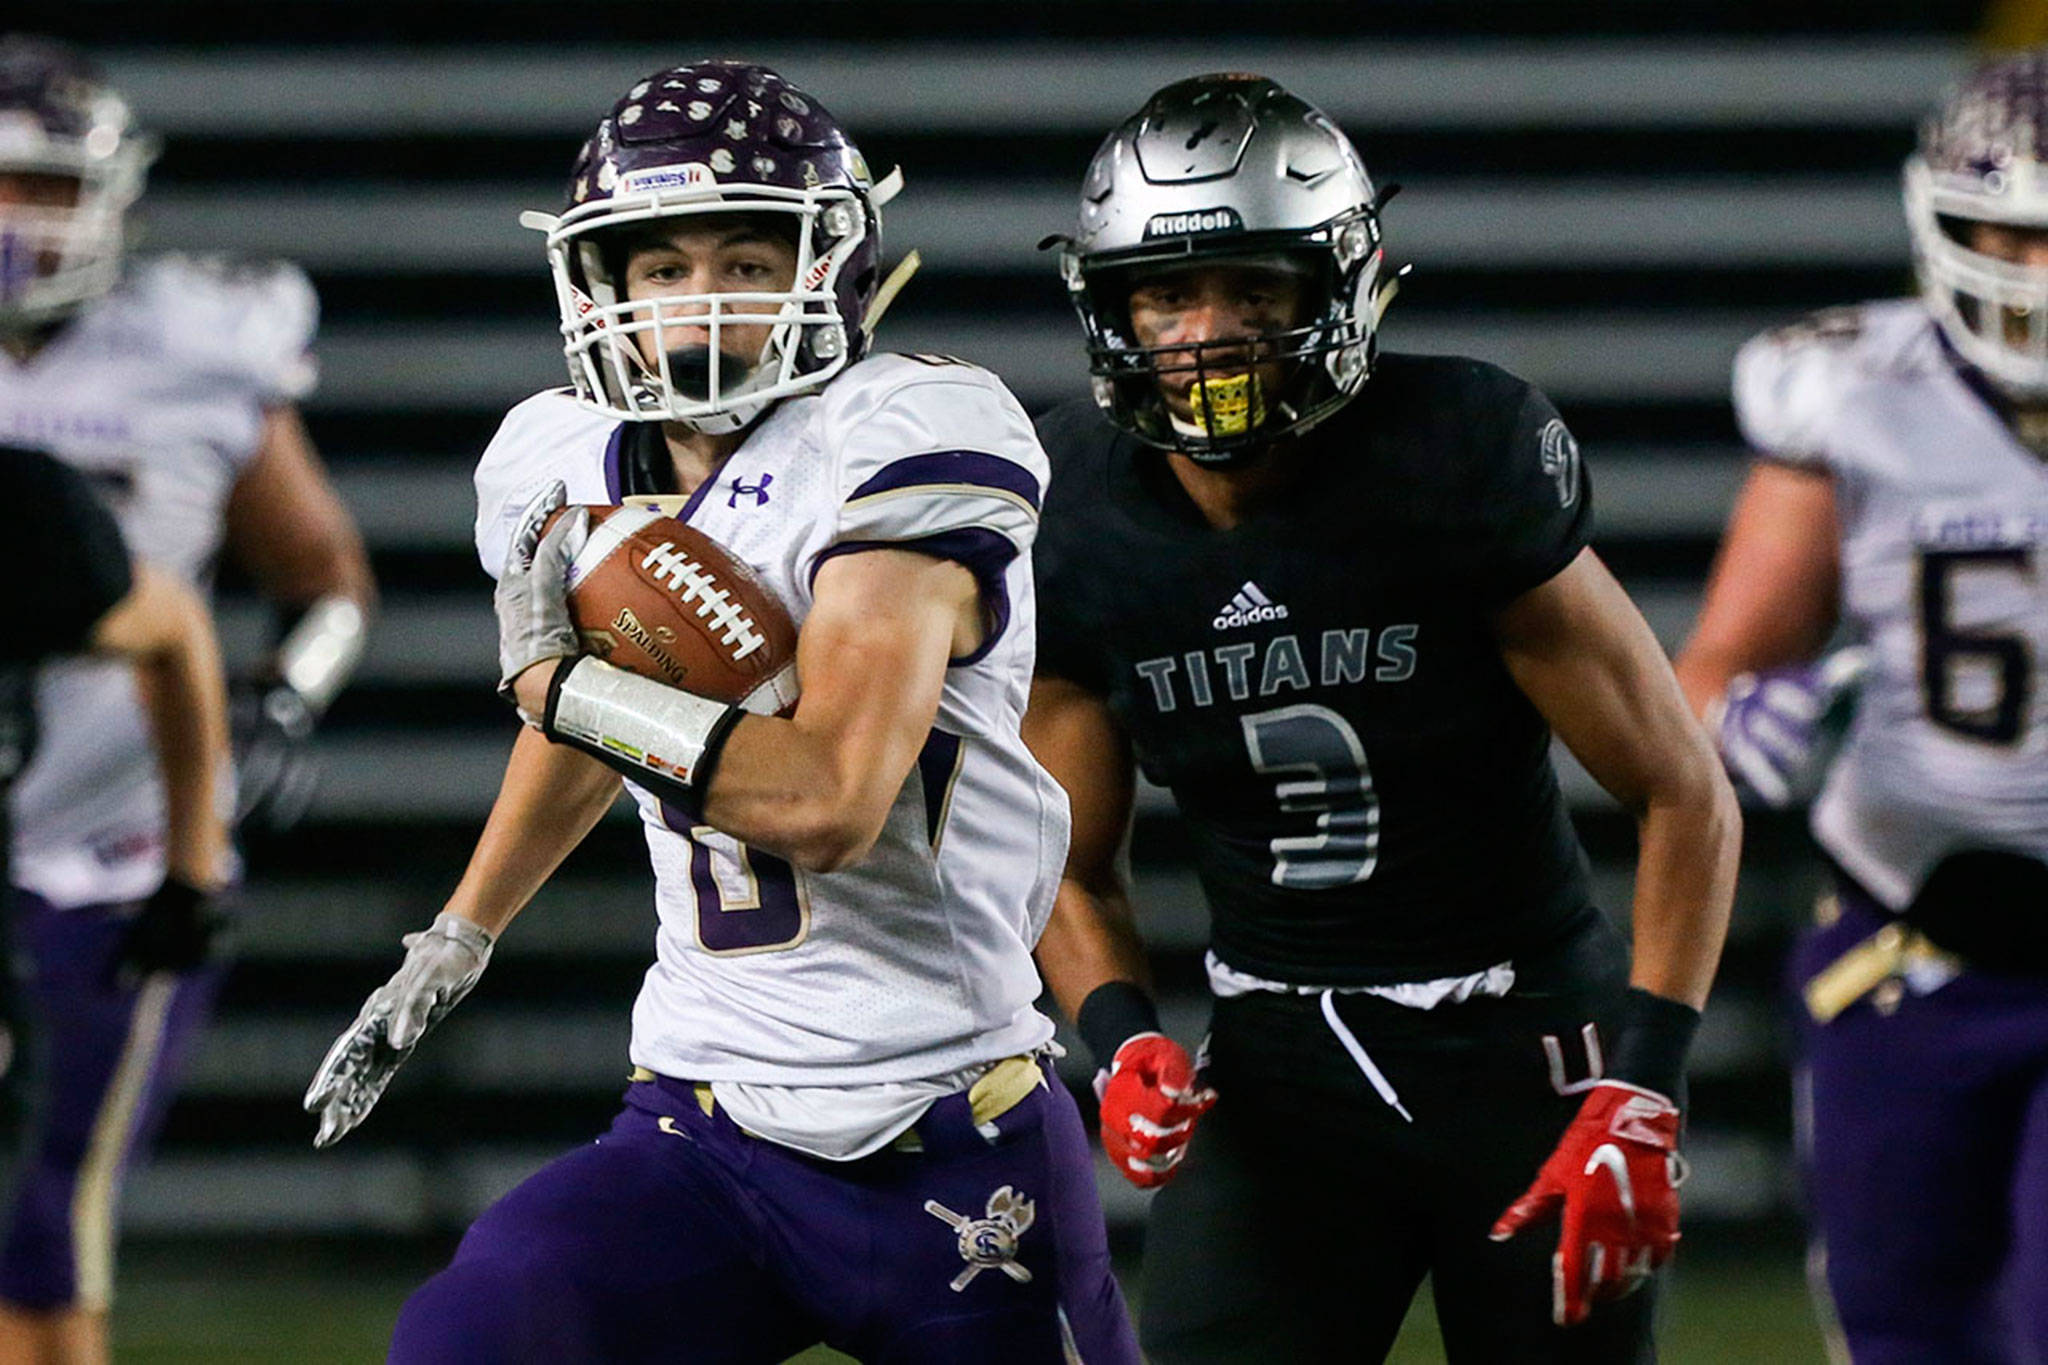 Lake Stevens running back Dallas Landeros carries the ball with Union’s Darien Chase trailing during last season’s 4A state championship game at the Tacoma Dome. (Kevin Clark / The Herald)